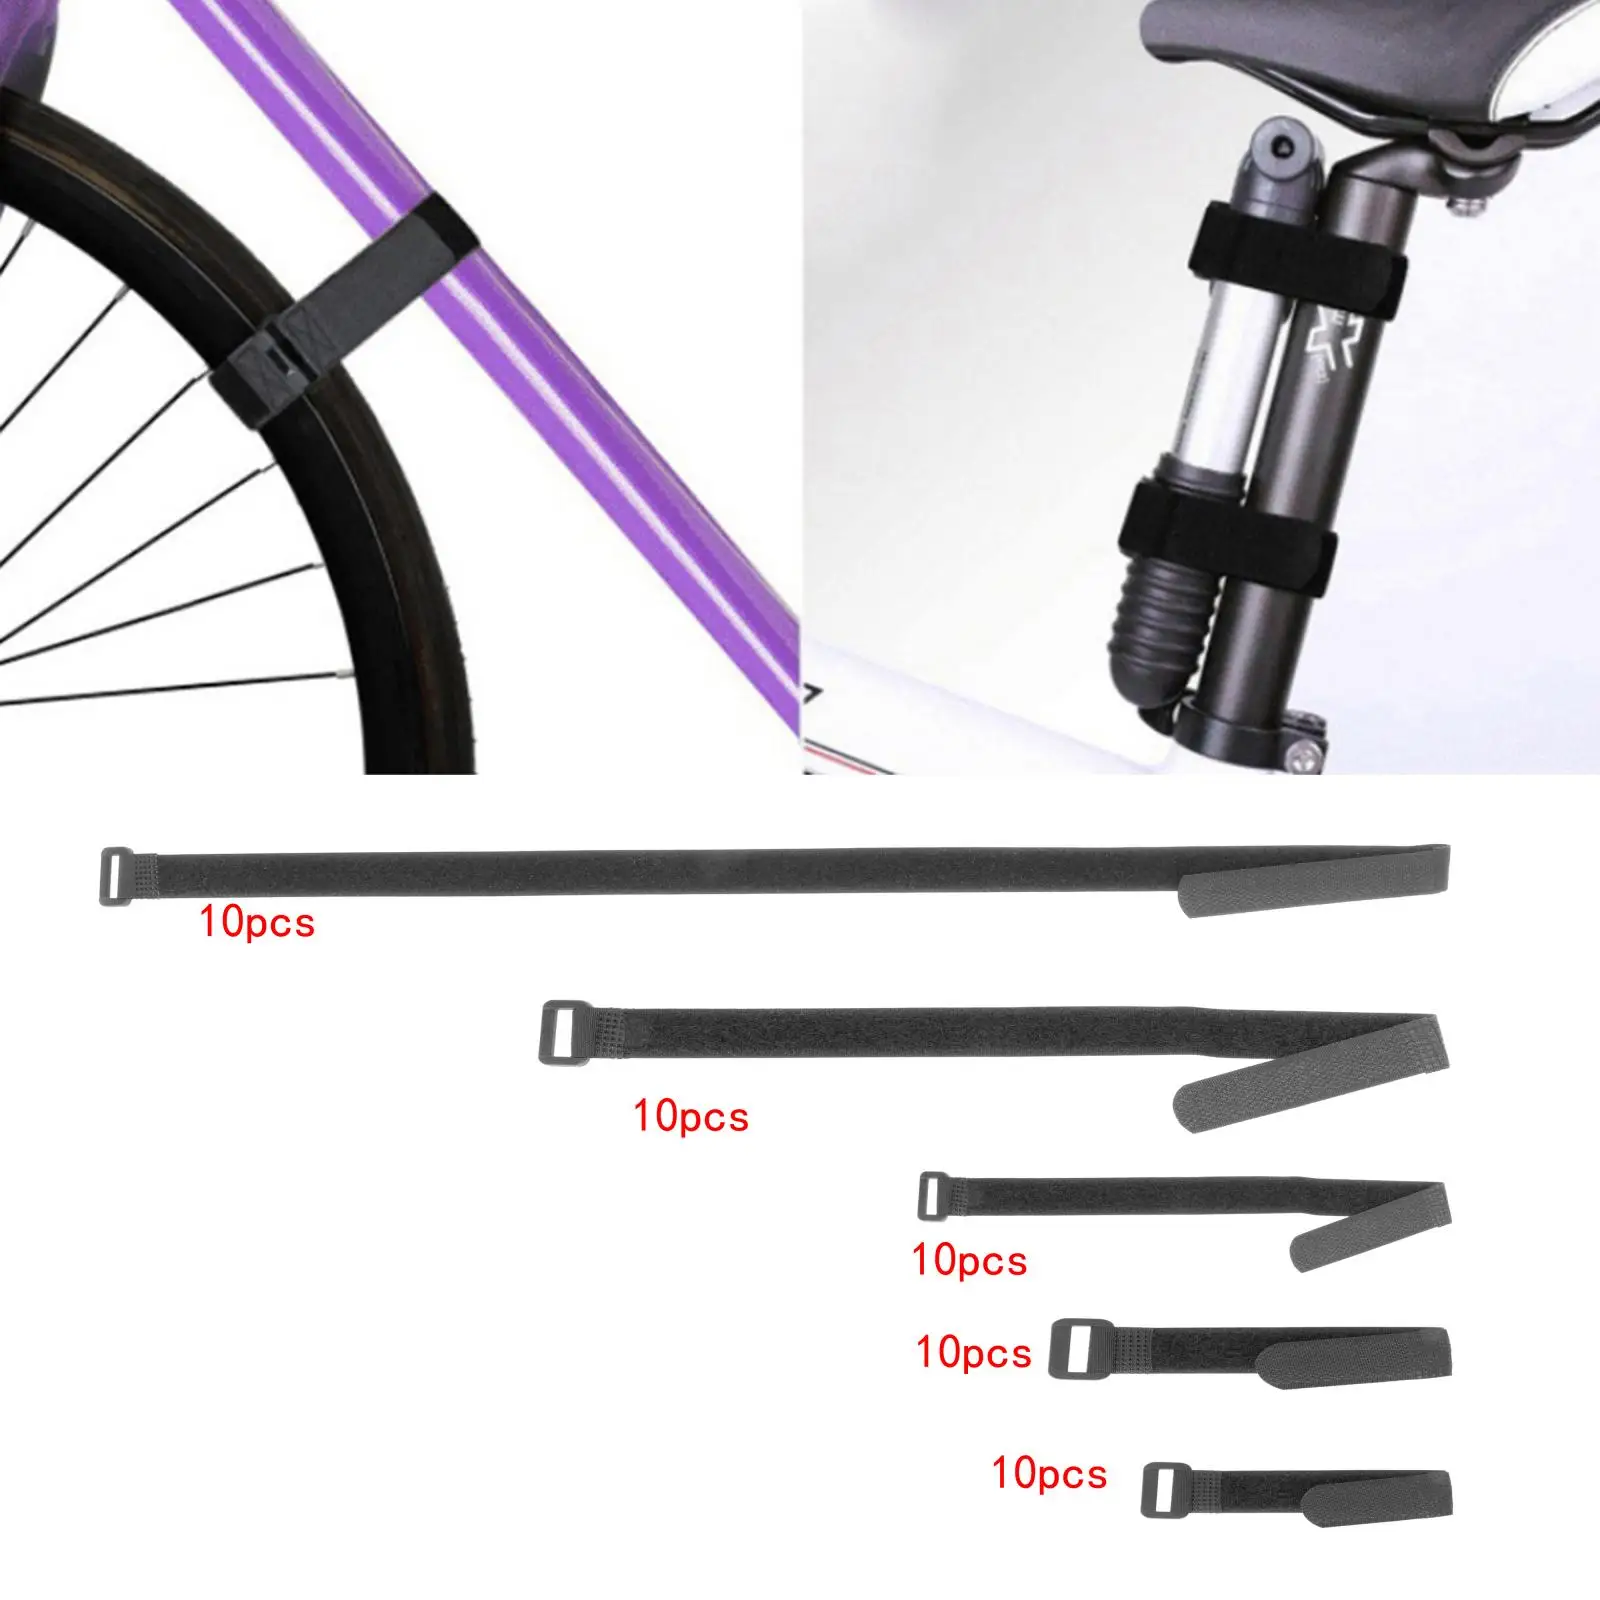 10pcs Reusable  Wheel Stabilizer Straps Tie Down  Roof Luggage Rack Transport Storage Cable Luggage Rack